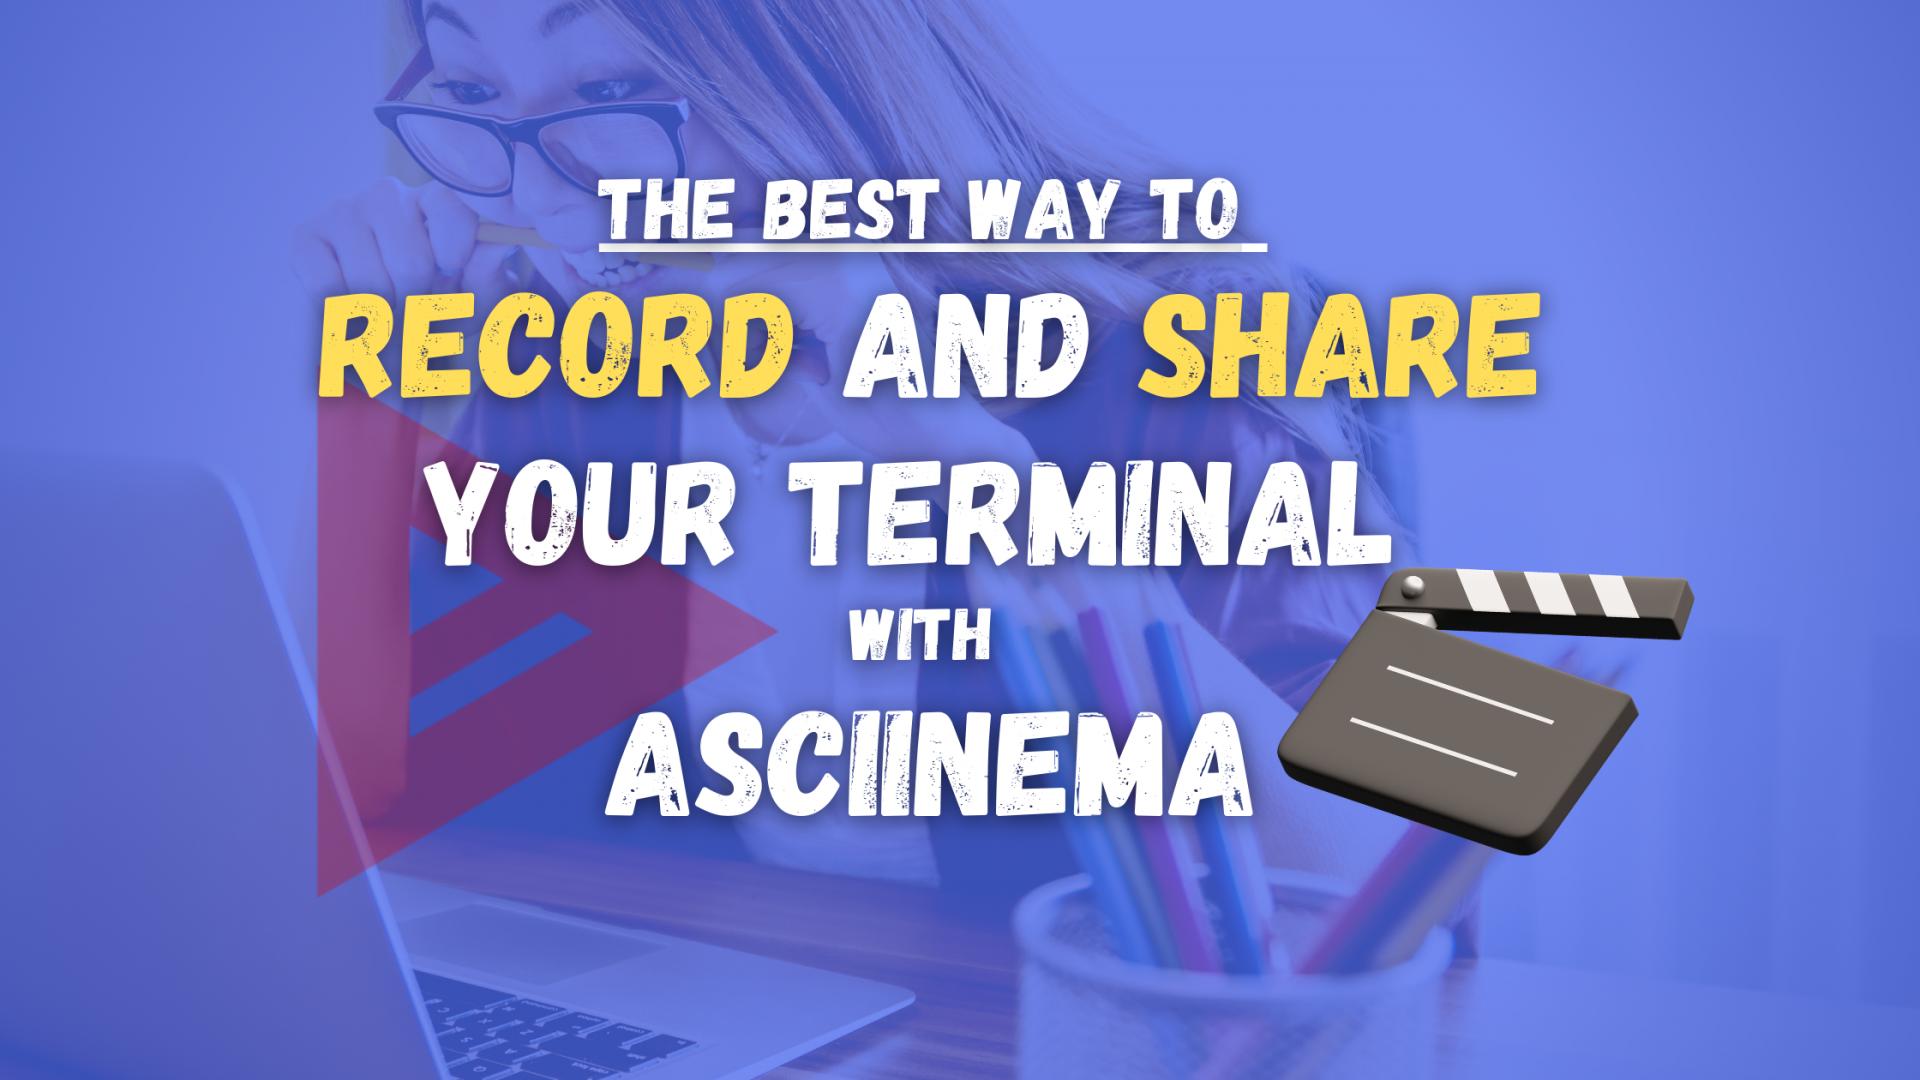 The best way of Recording and Sharing your Terminal with Asciinema